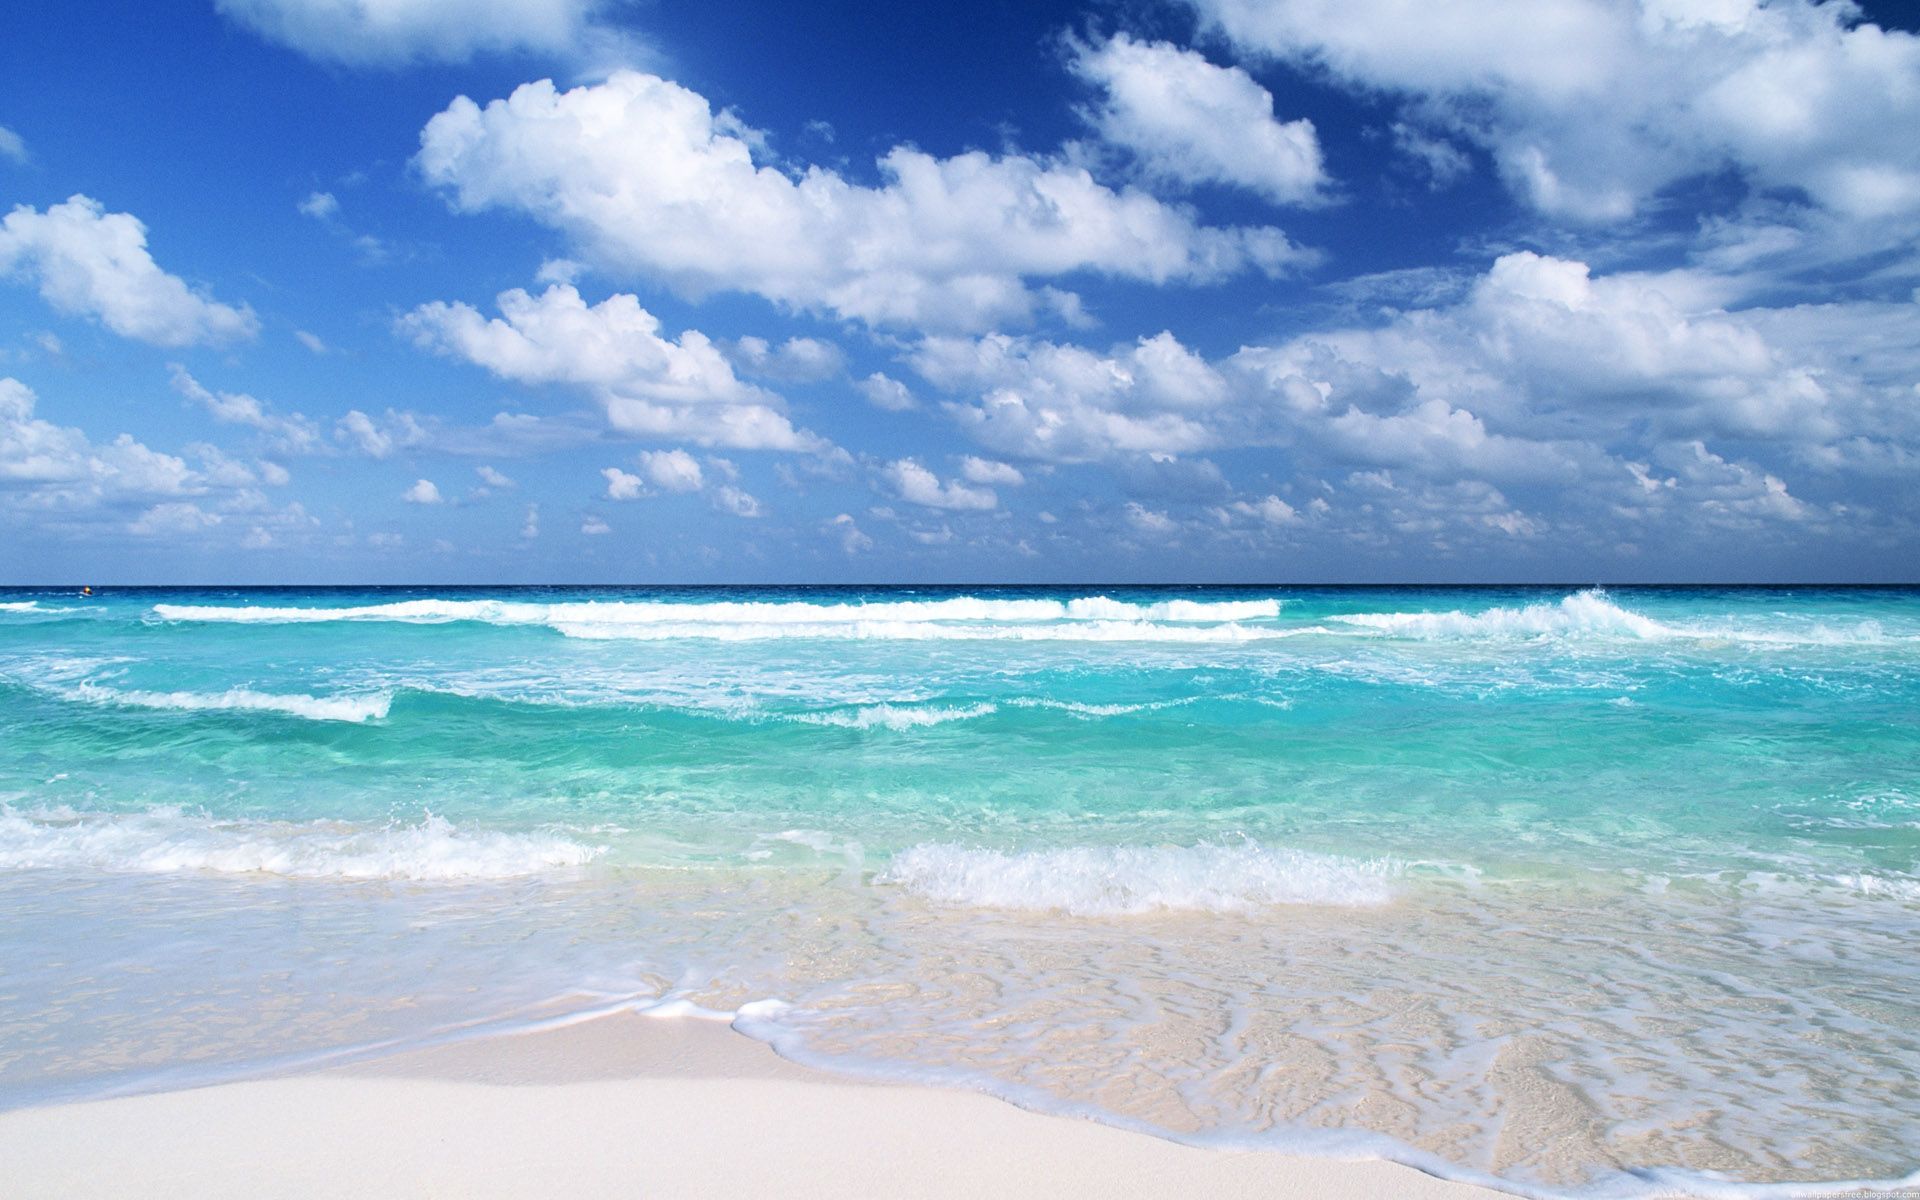 Gallery For gt Beautiful Beach Sky Backgrounds 1920x1200